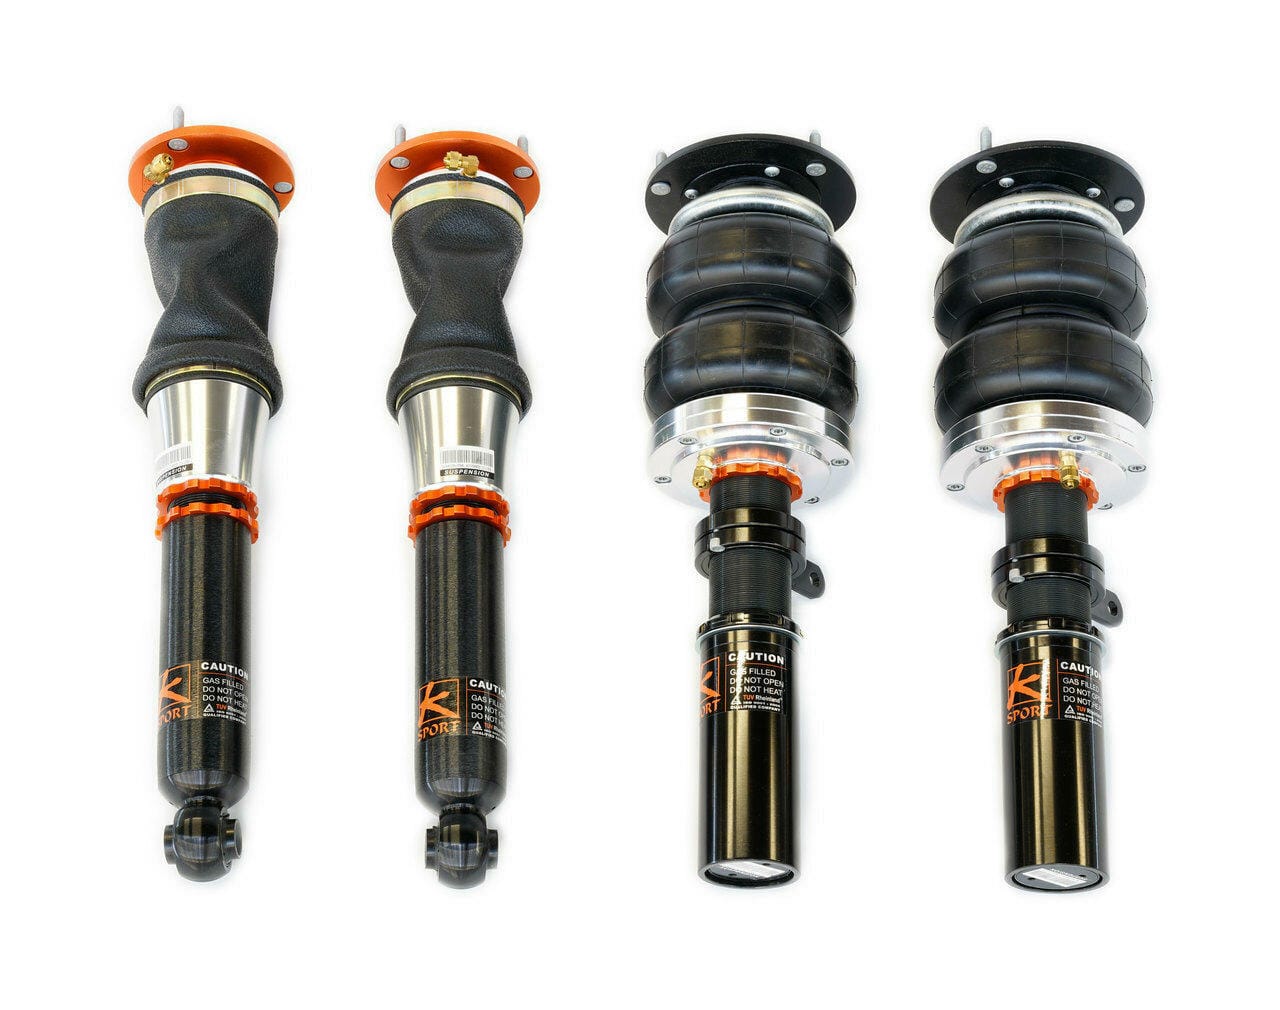 Ksport Airtech Air Suspension System (Struts Only) - 1995-2001 BMW 7 Series 8 Cyl. Excl. OEM Air Suspension Models (E38) CBM281-ASO